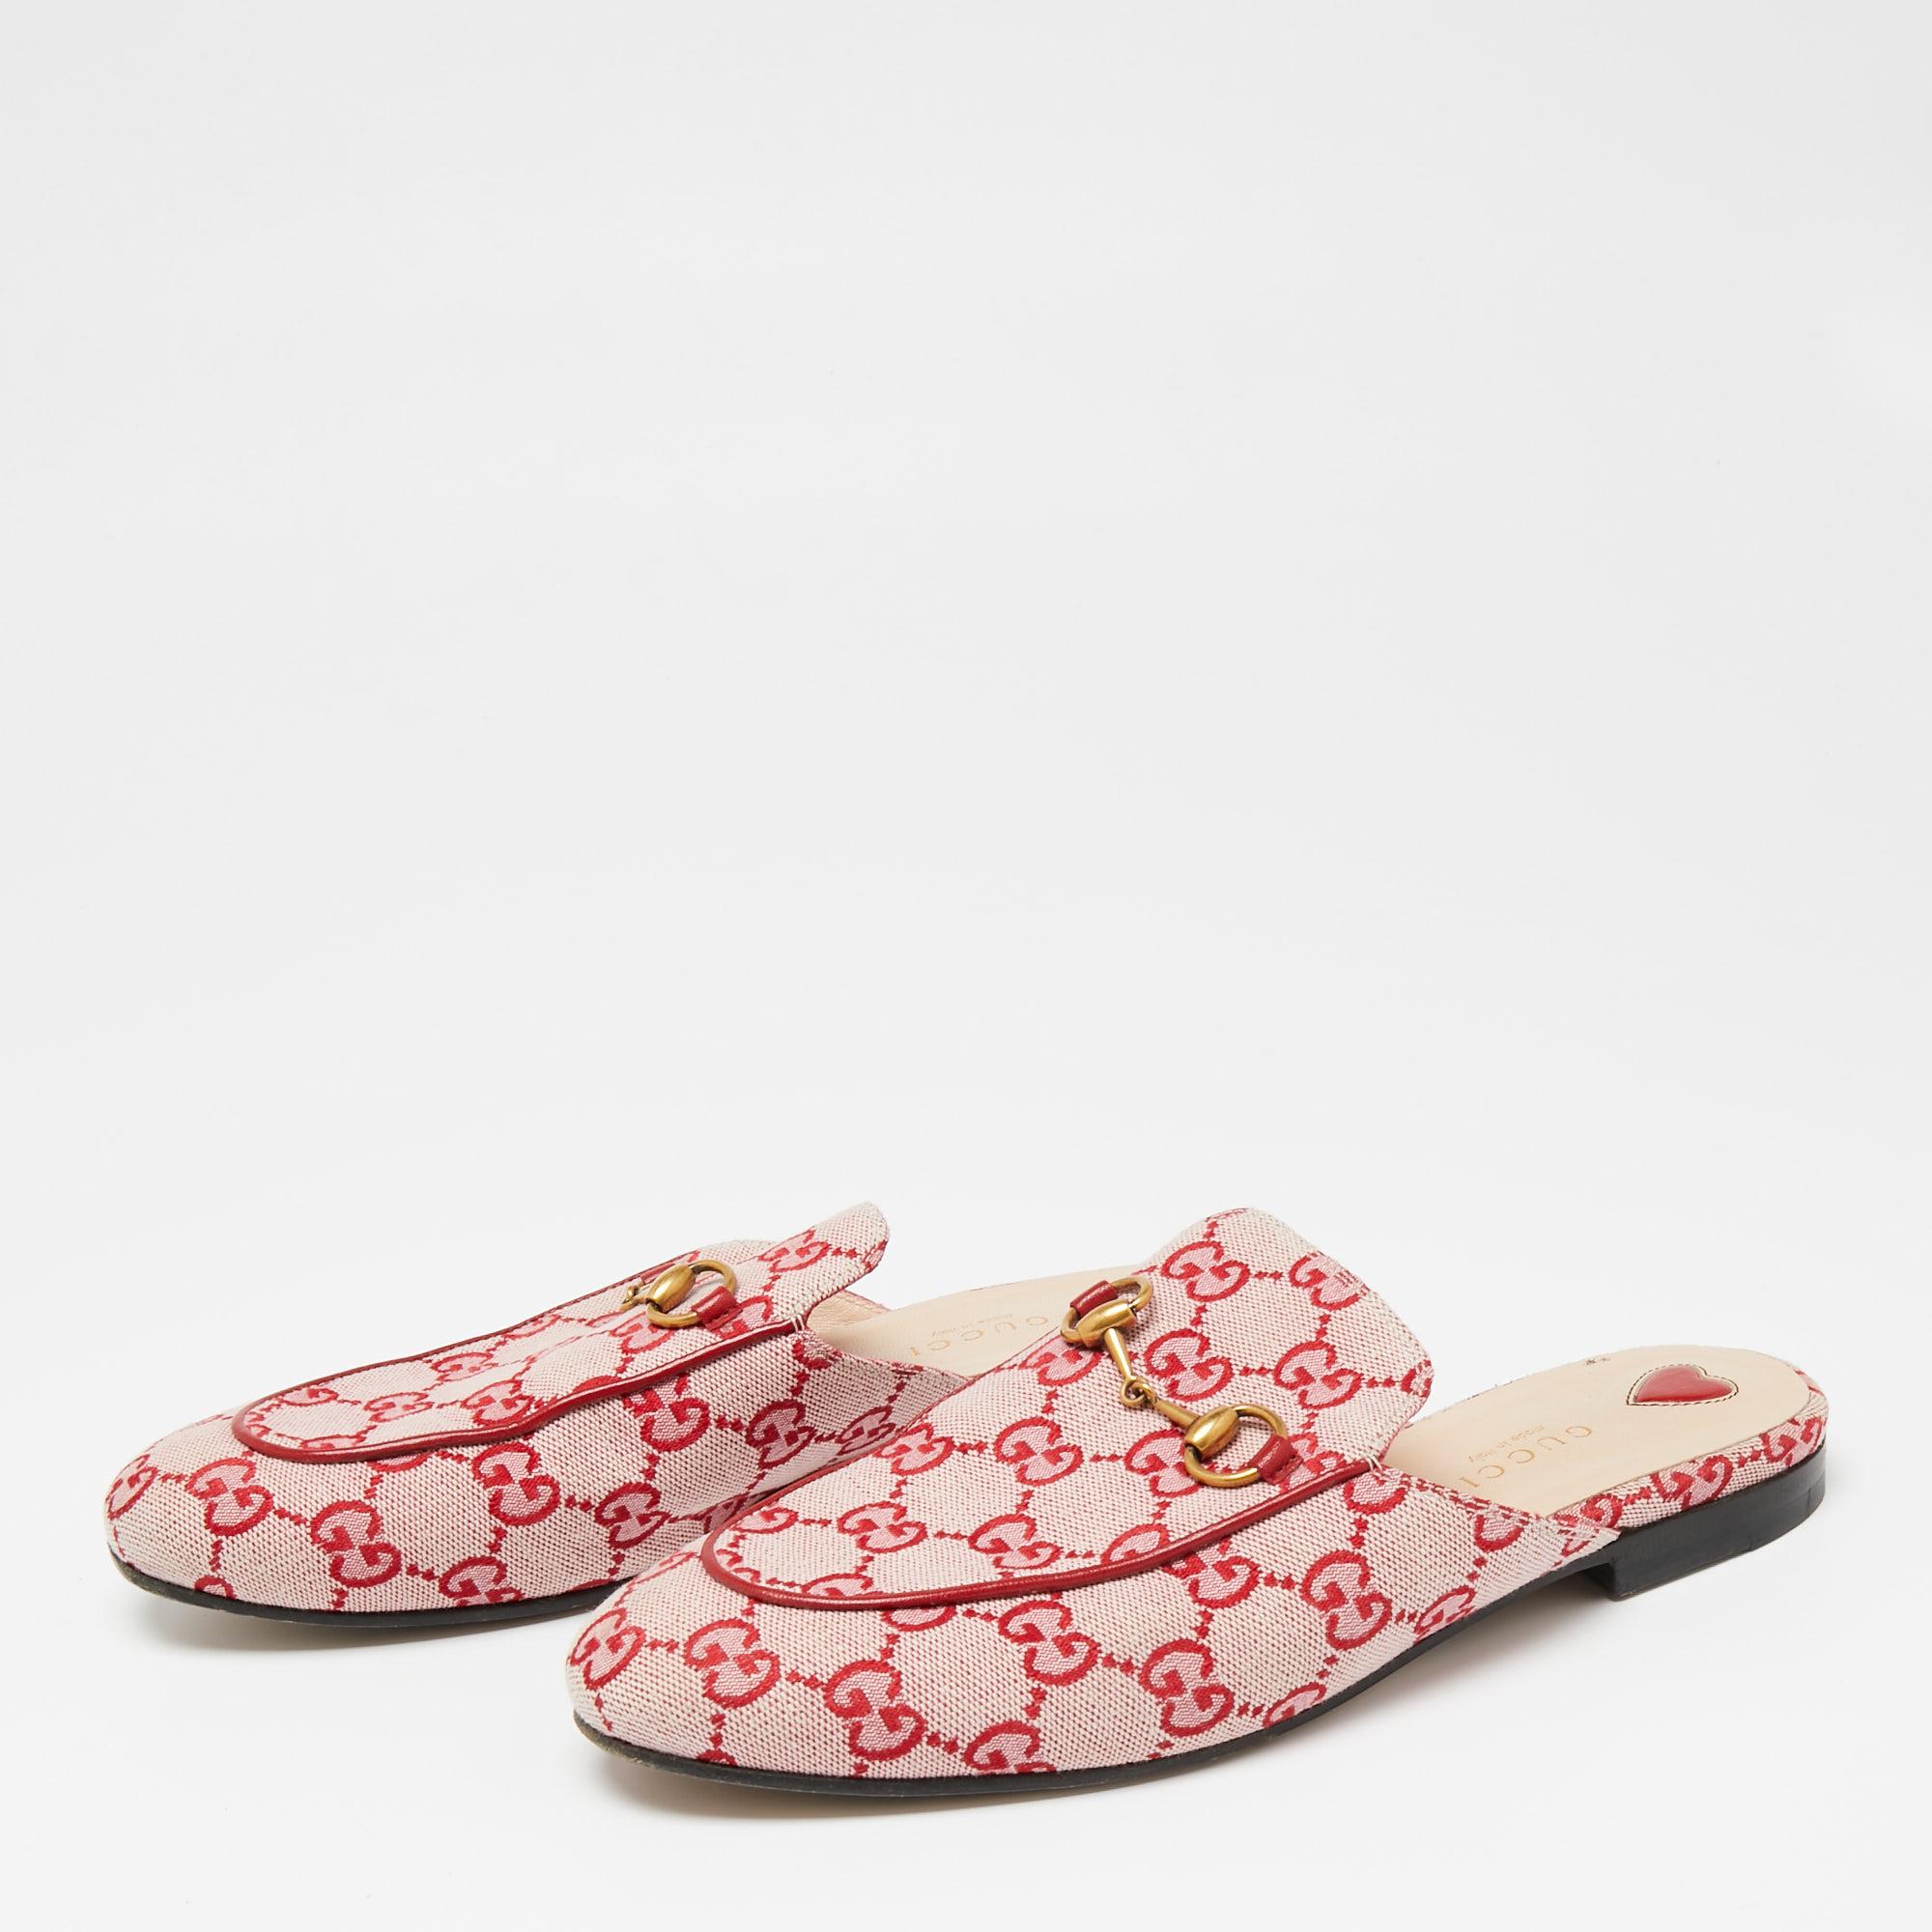 First introduced as part of Gucci's Fall Winter 2015 collection, the Princetown mules are an absolute favorite worldwide. These mules have been designed in GG canvas with the signature Horsebit accent on the vamps. Comfortable insoles and an easy